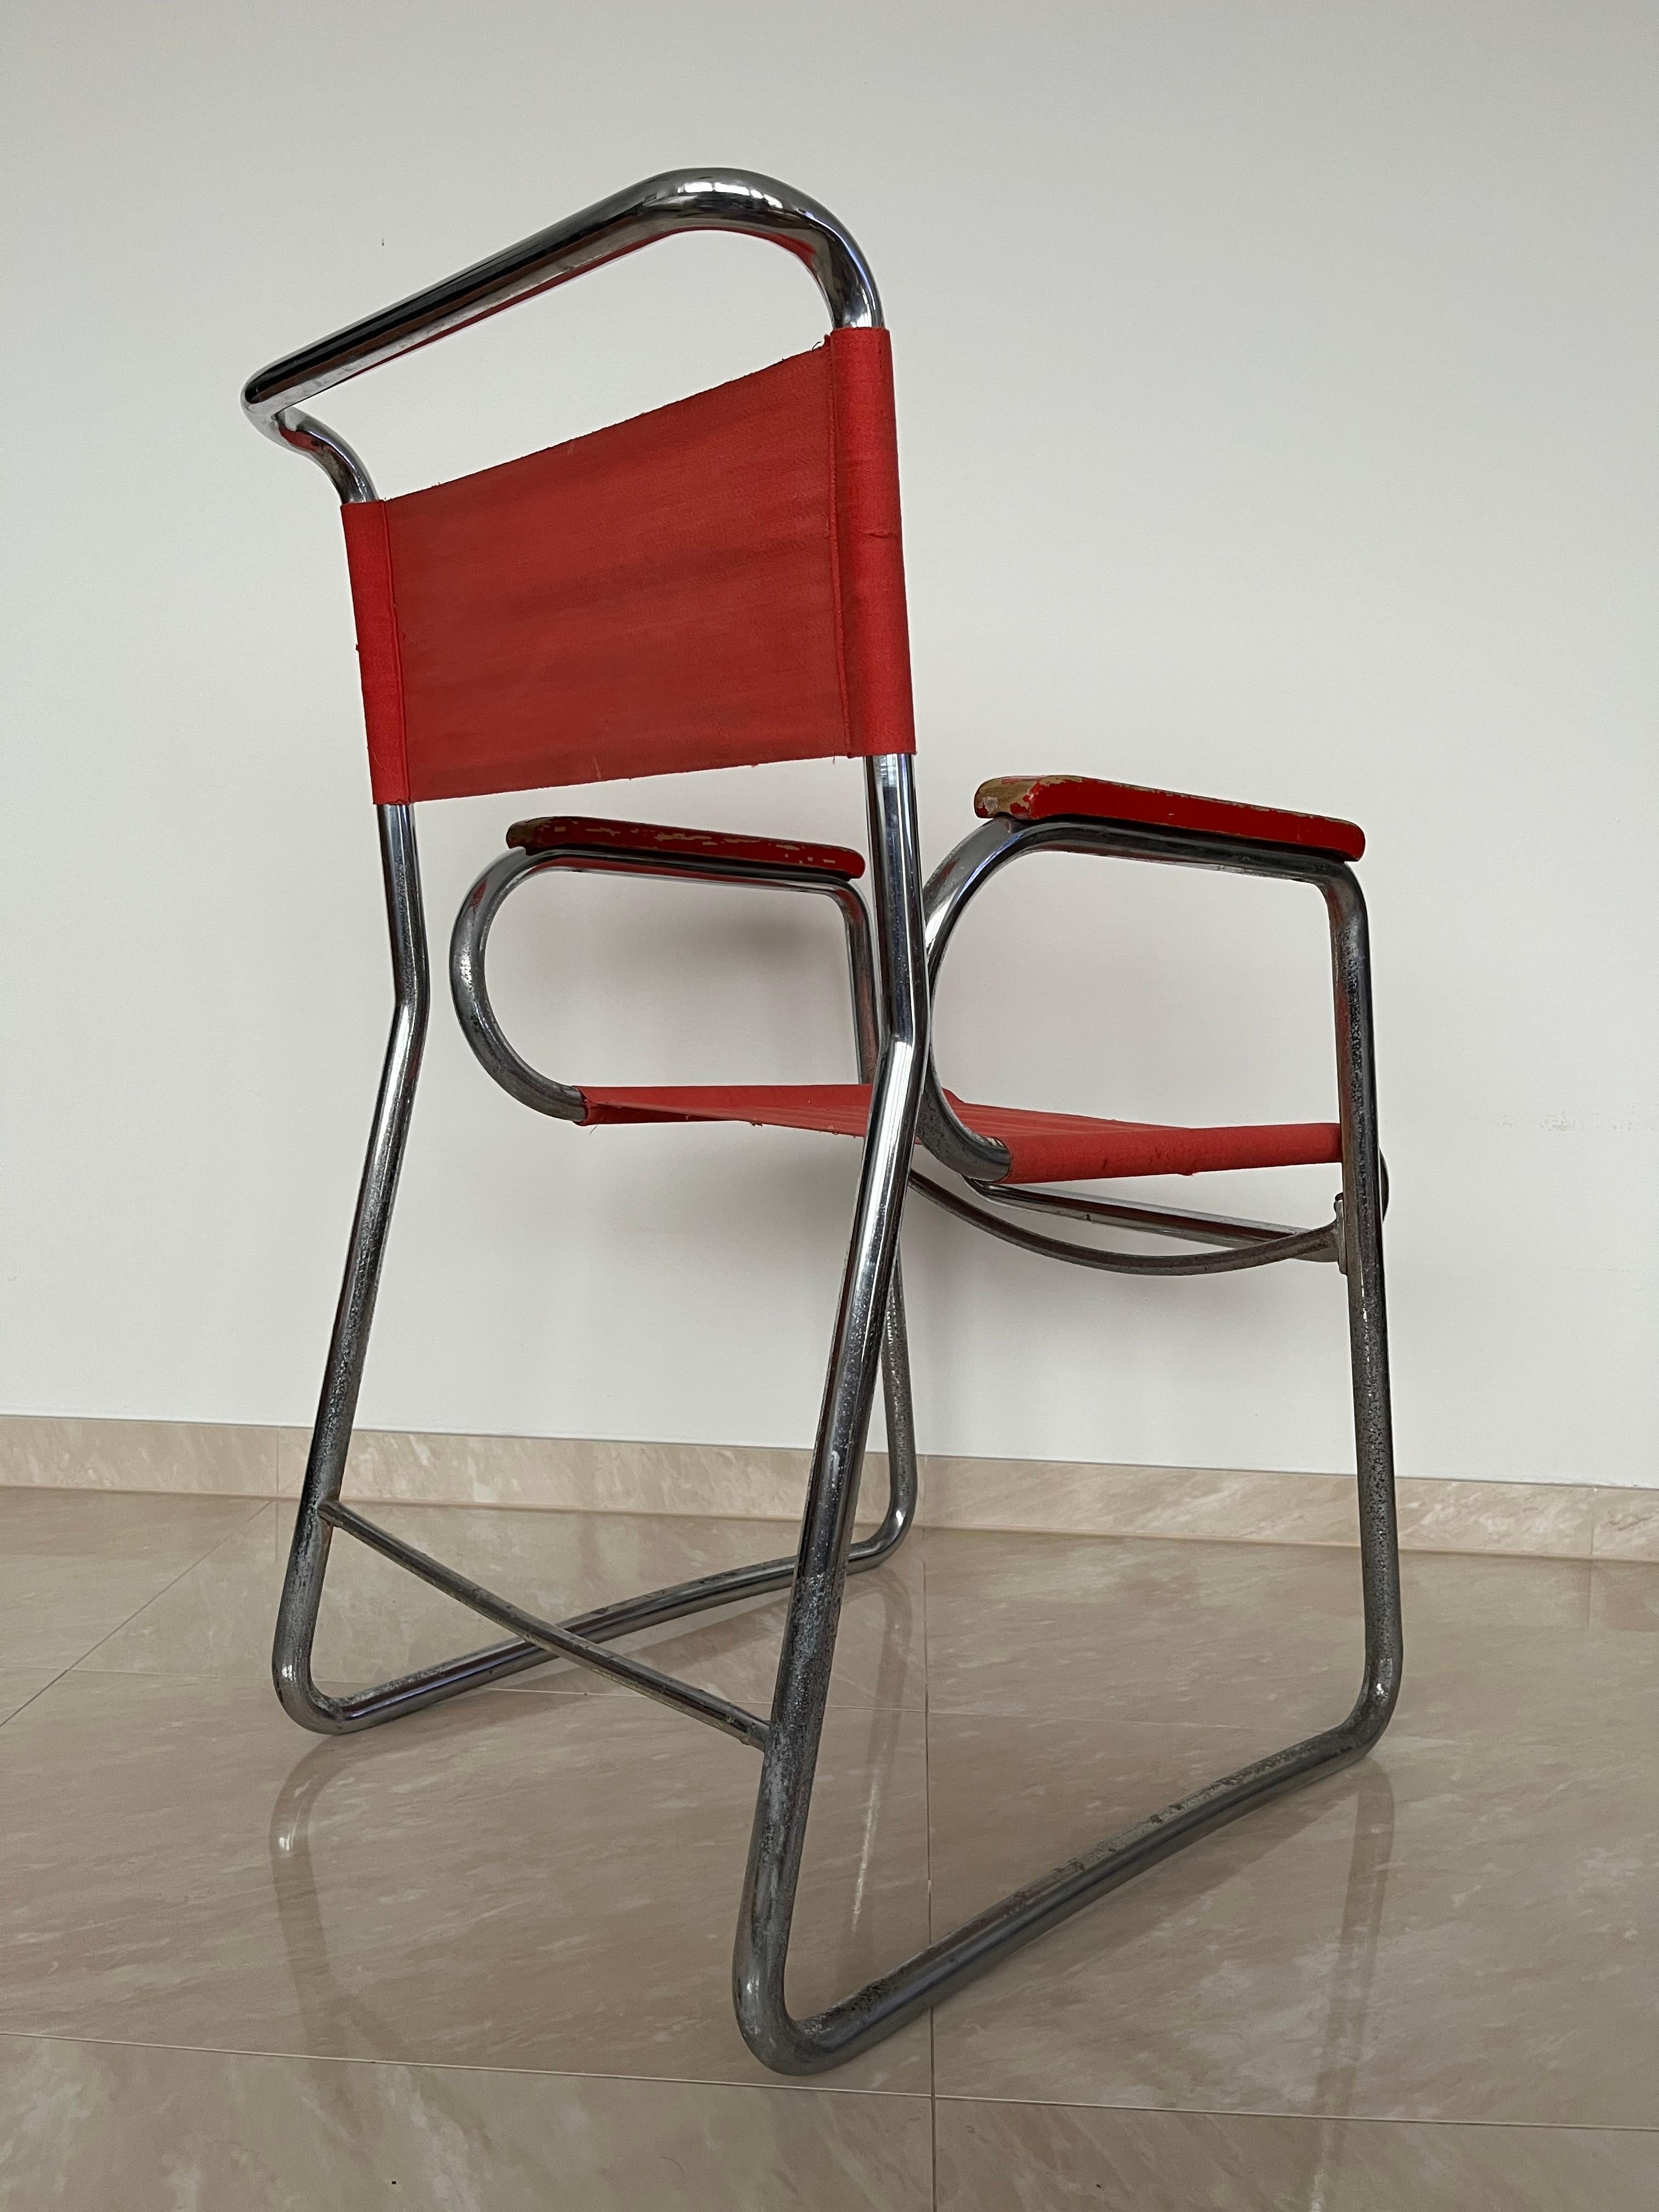 Bauhaus Extremely RARE bauhaus chrome massive chair by Frantisek Berger - 1930s For Sale